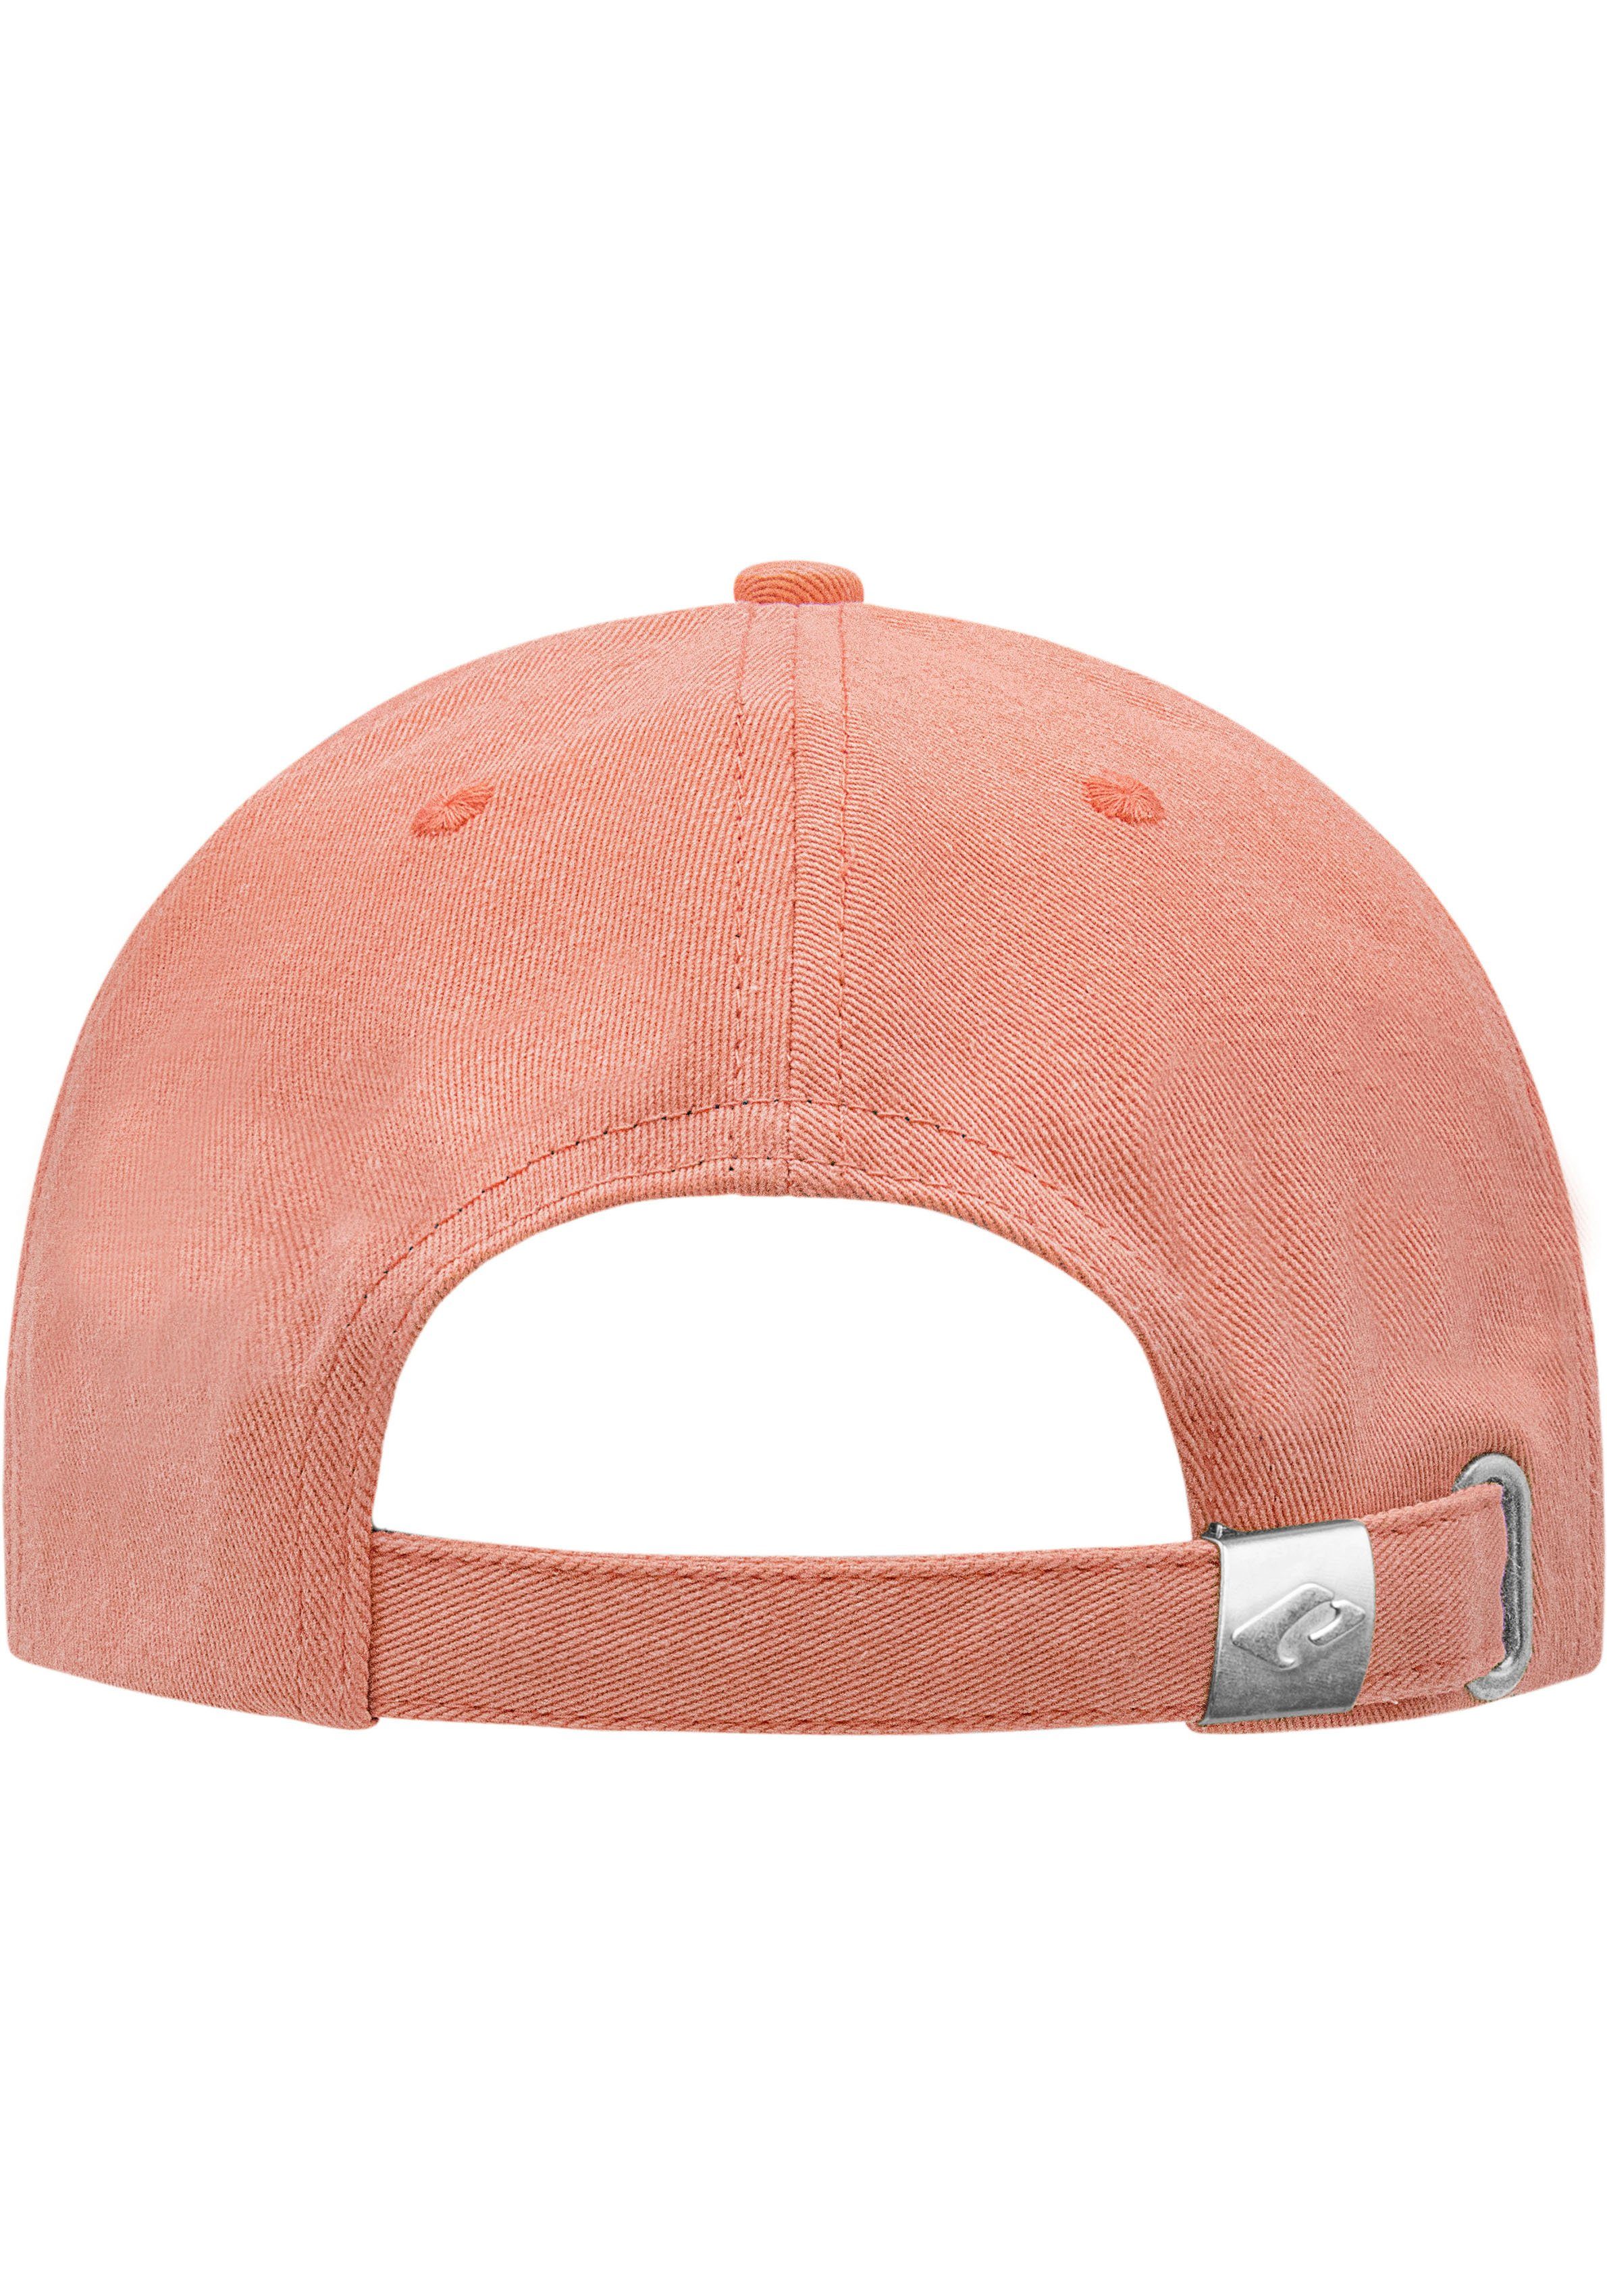 Baseball coral chillouts Hat Cap Arklow